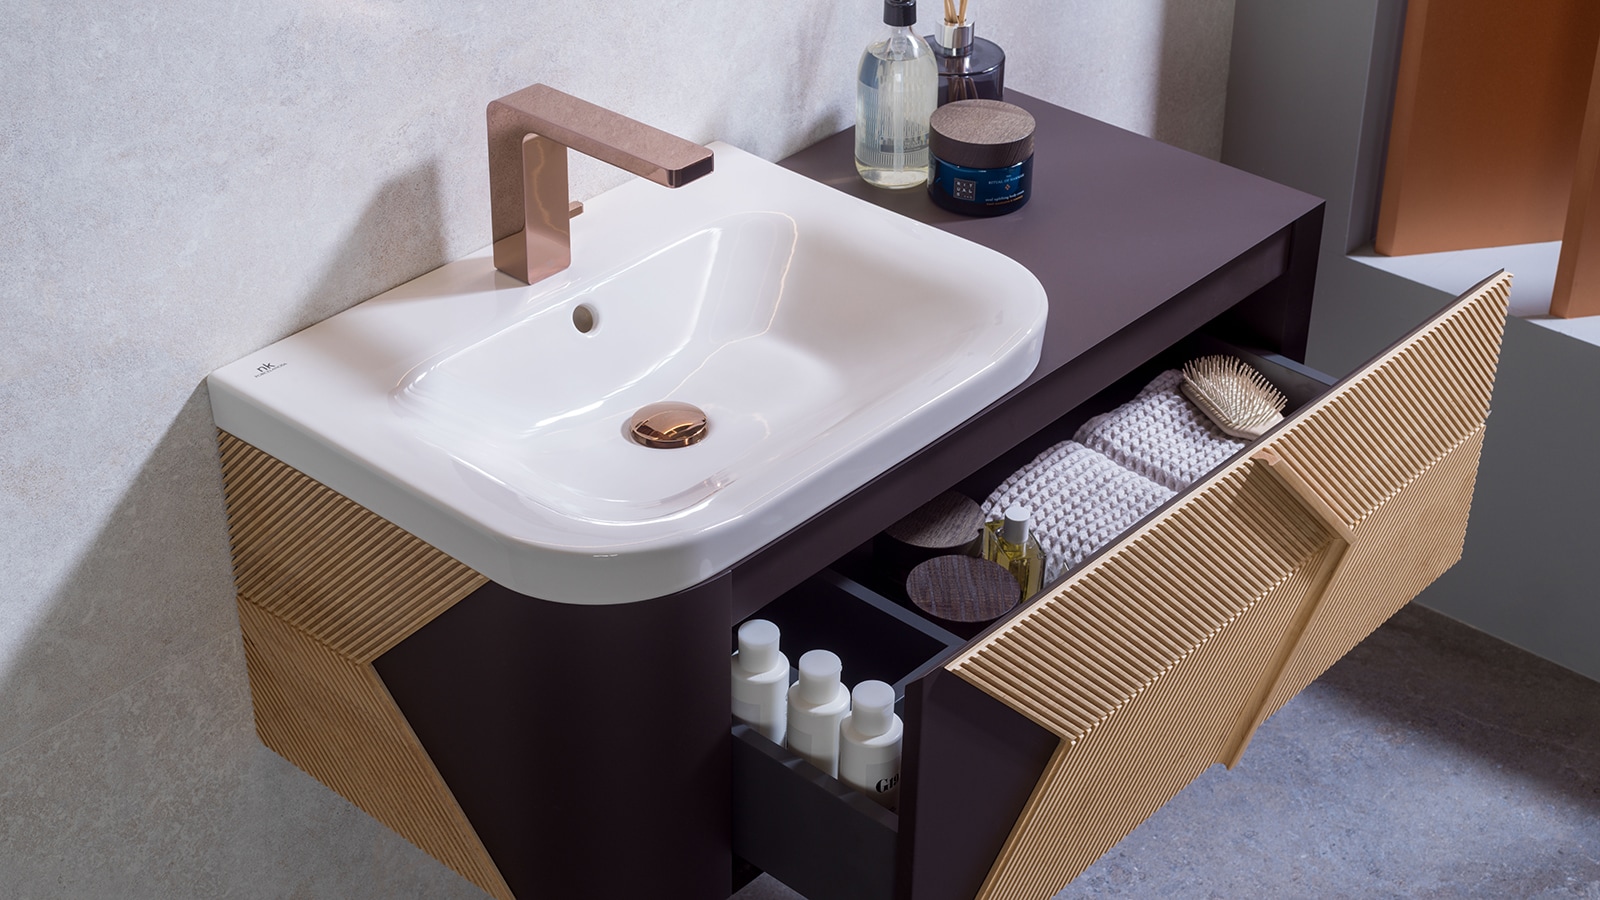 Perfectly capturing autumn colours in bathroom furnishings